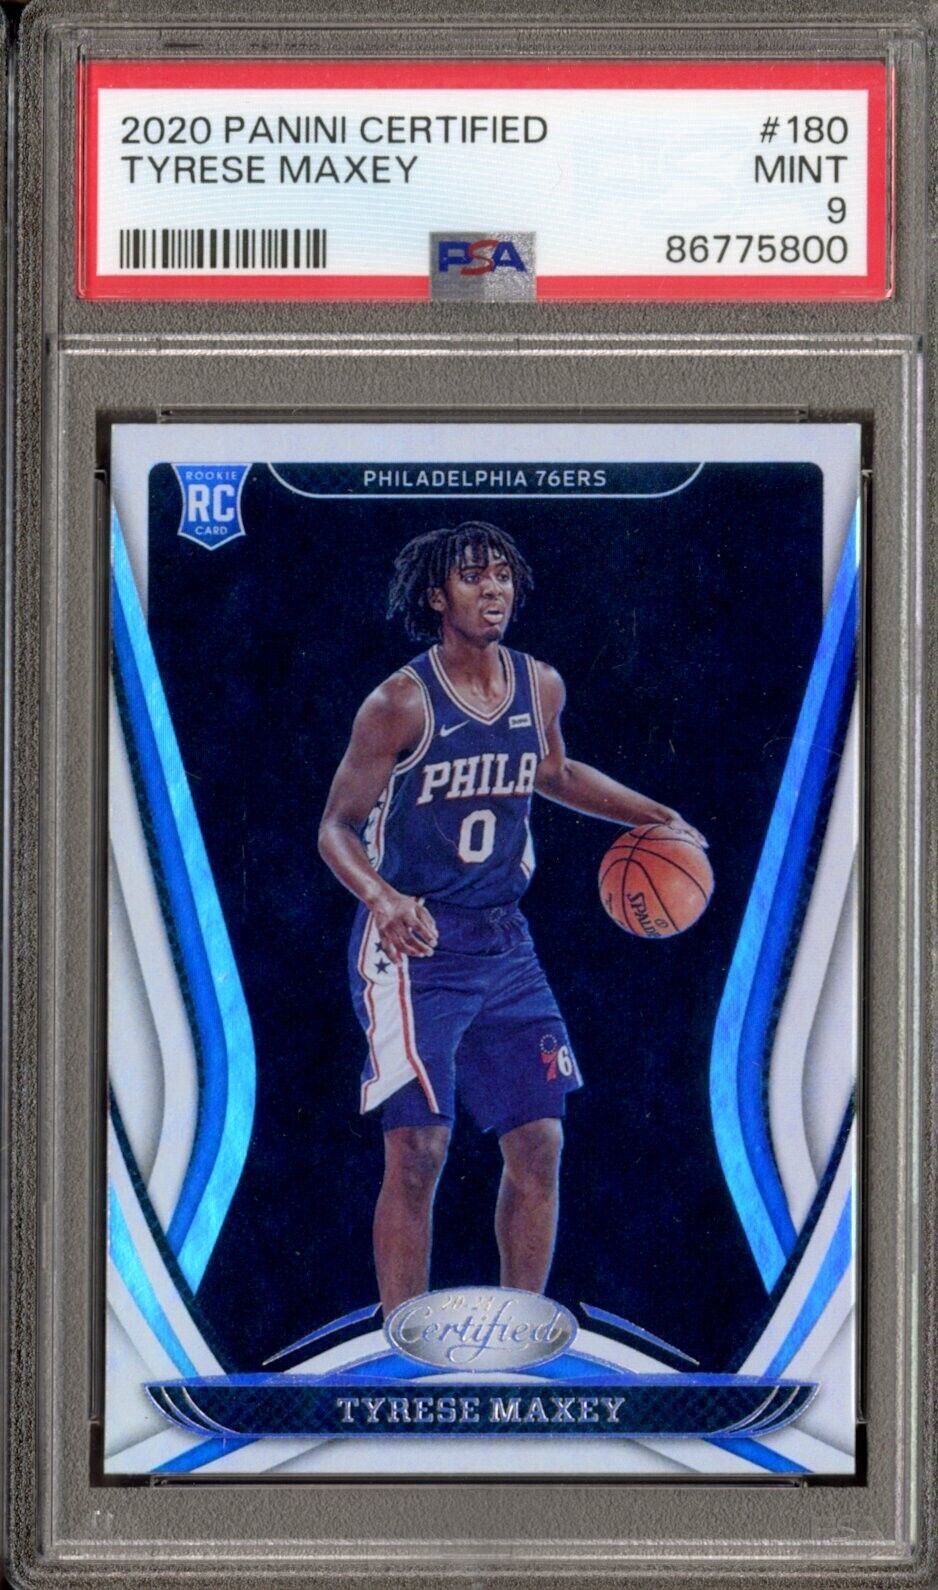 2020 Panini Certified Tyrese Maxey PSA 9 Mint #180 RC Rookie